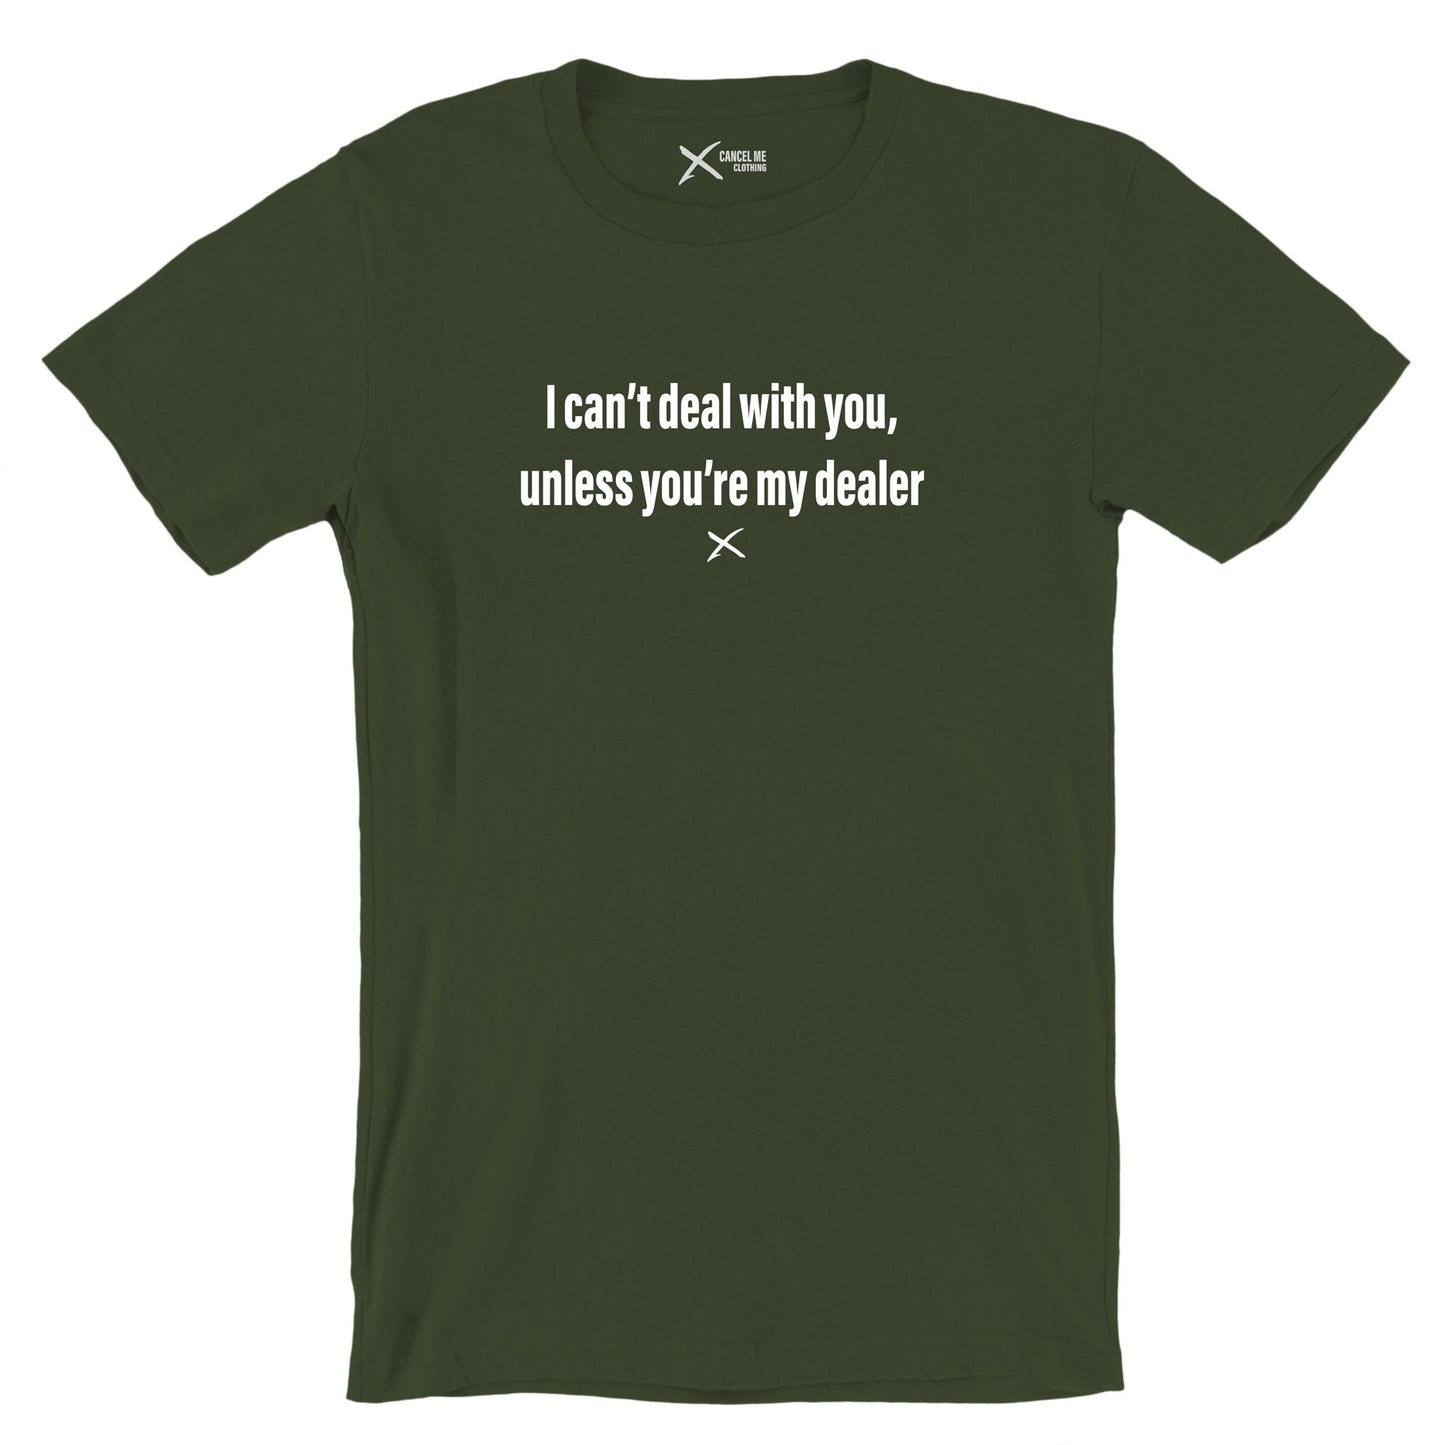 I can't deal with you, unless you're my dealer - Shirt